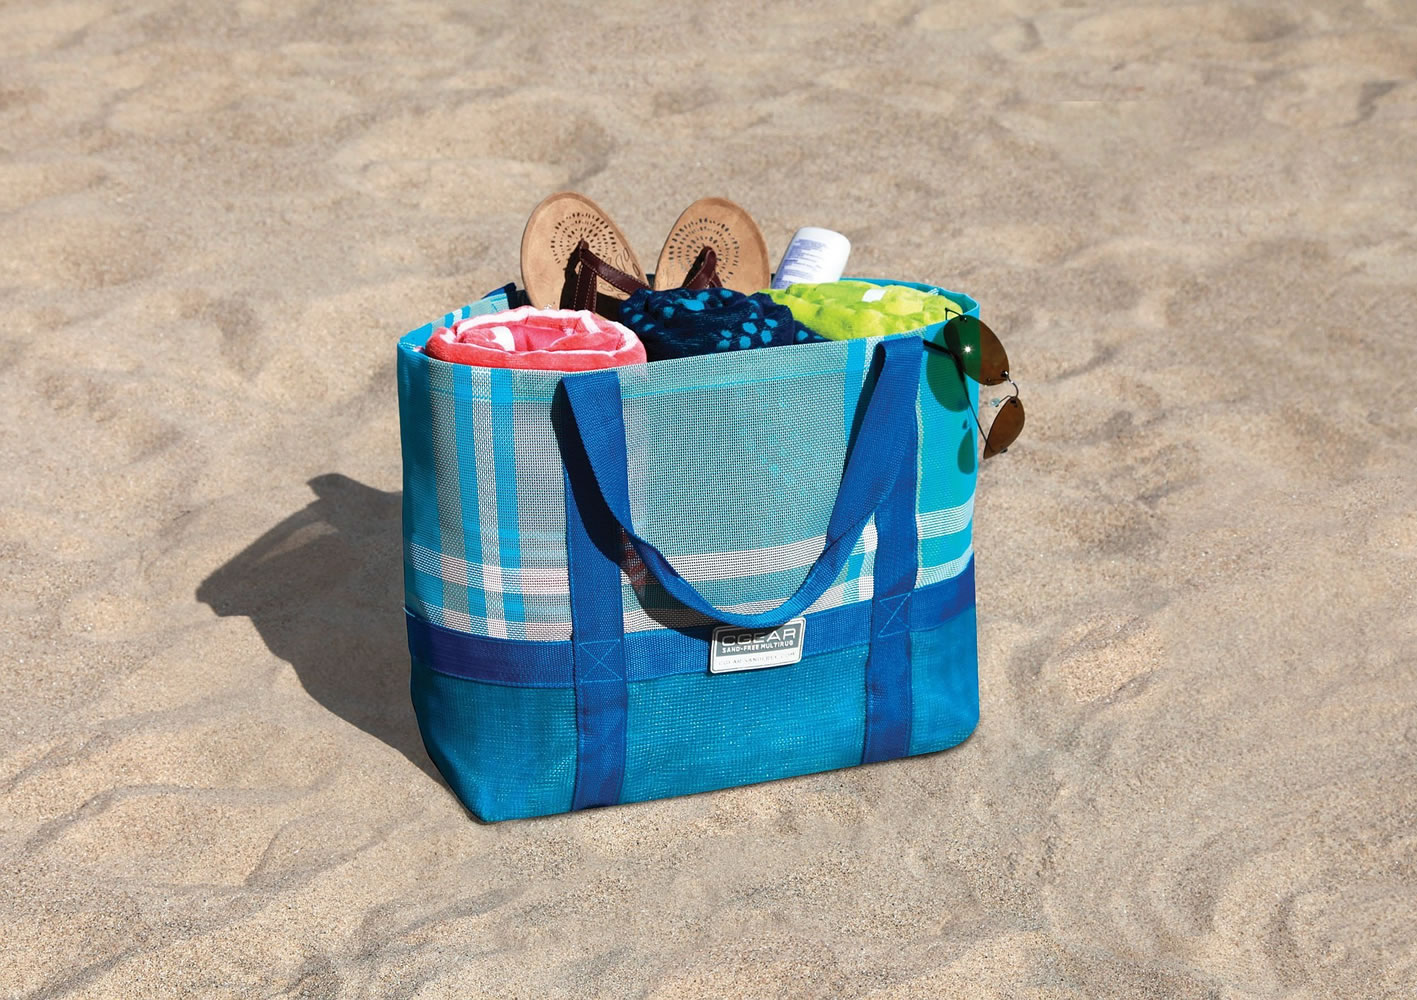 Add this Sandless Beach Tote bag to your pool or beach day.